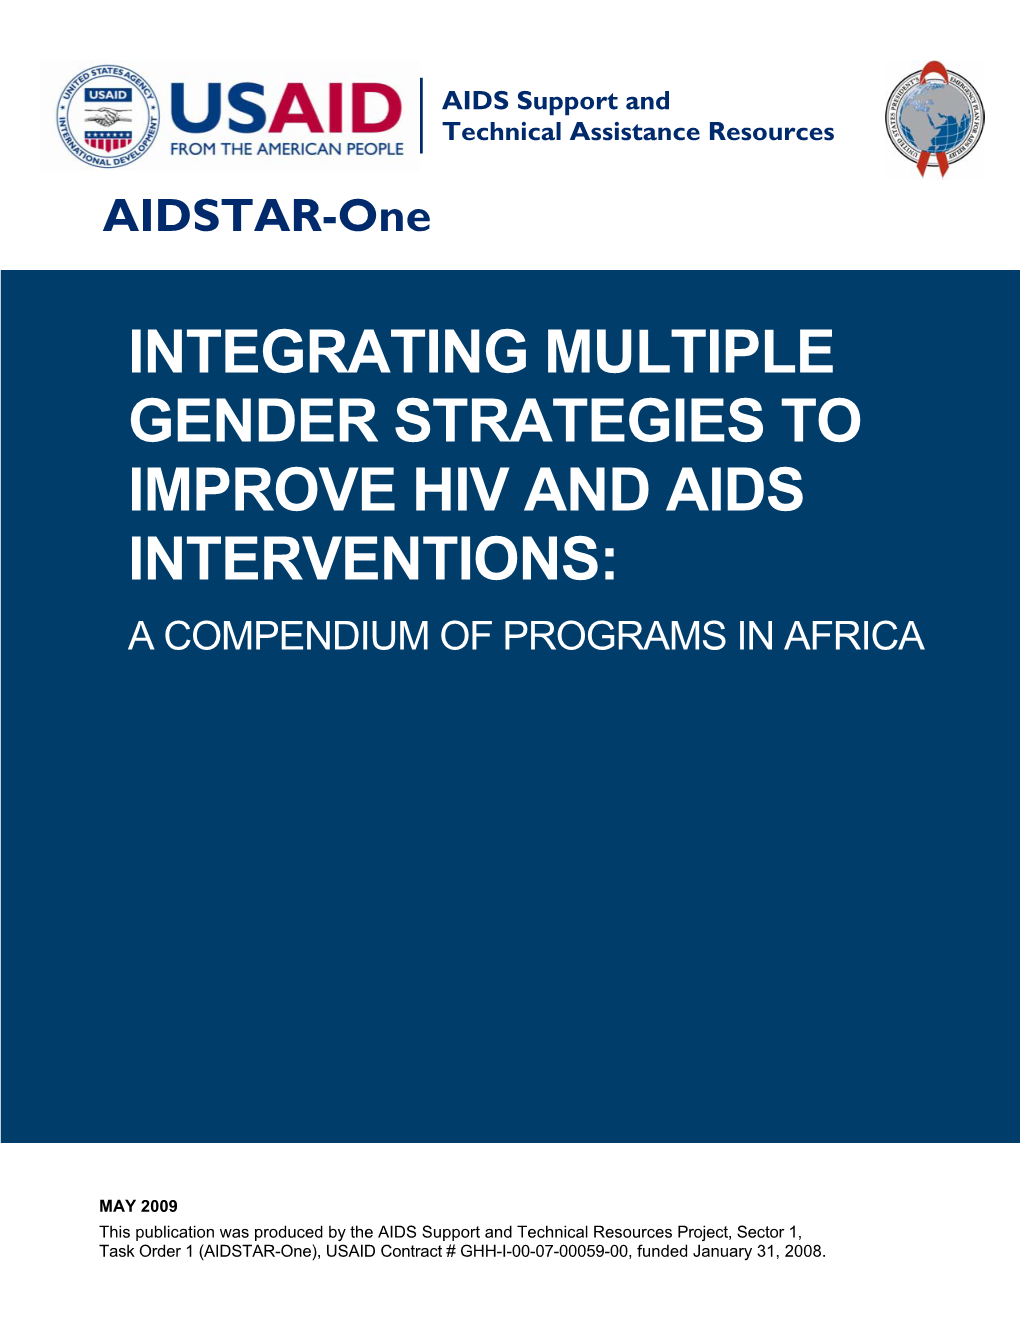 Implementing Multiple Gender Strategies to Improve HIV and AIDS